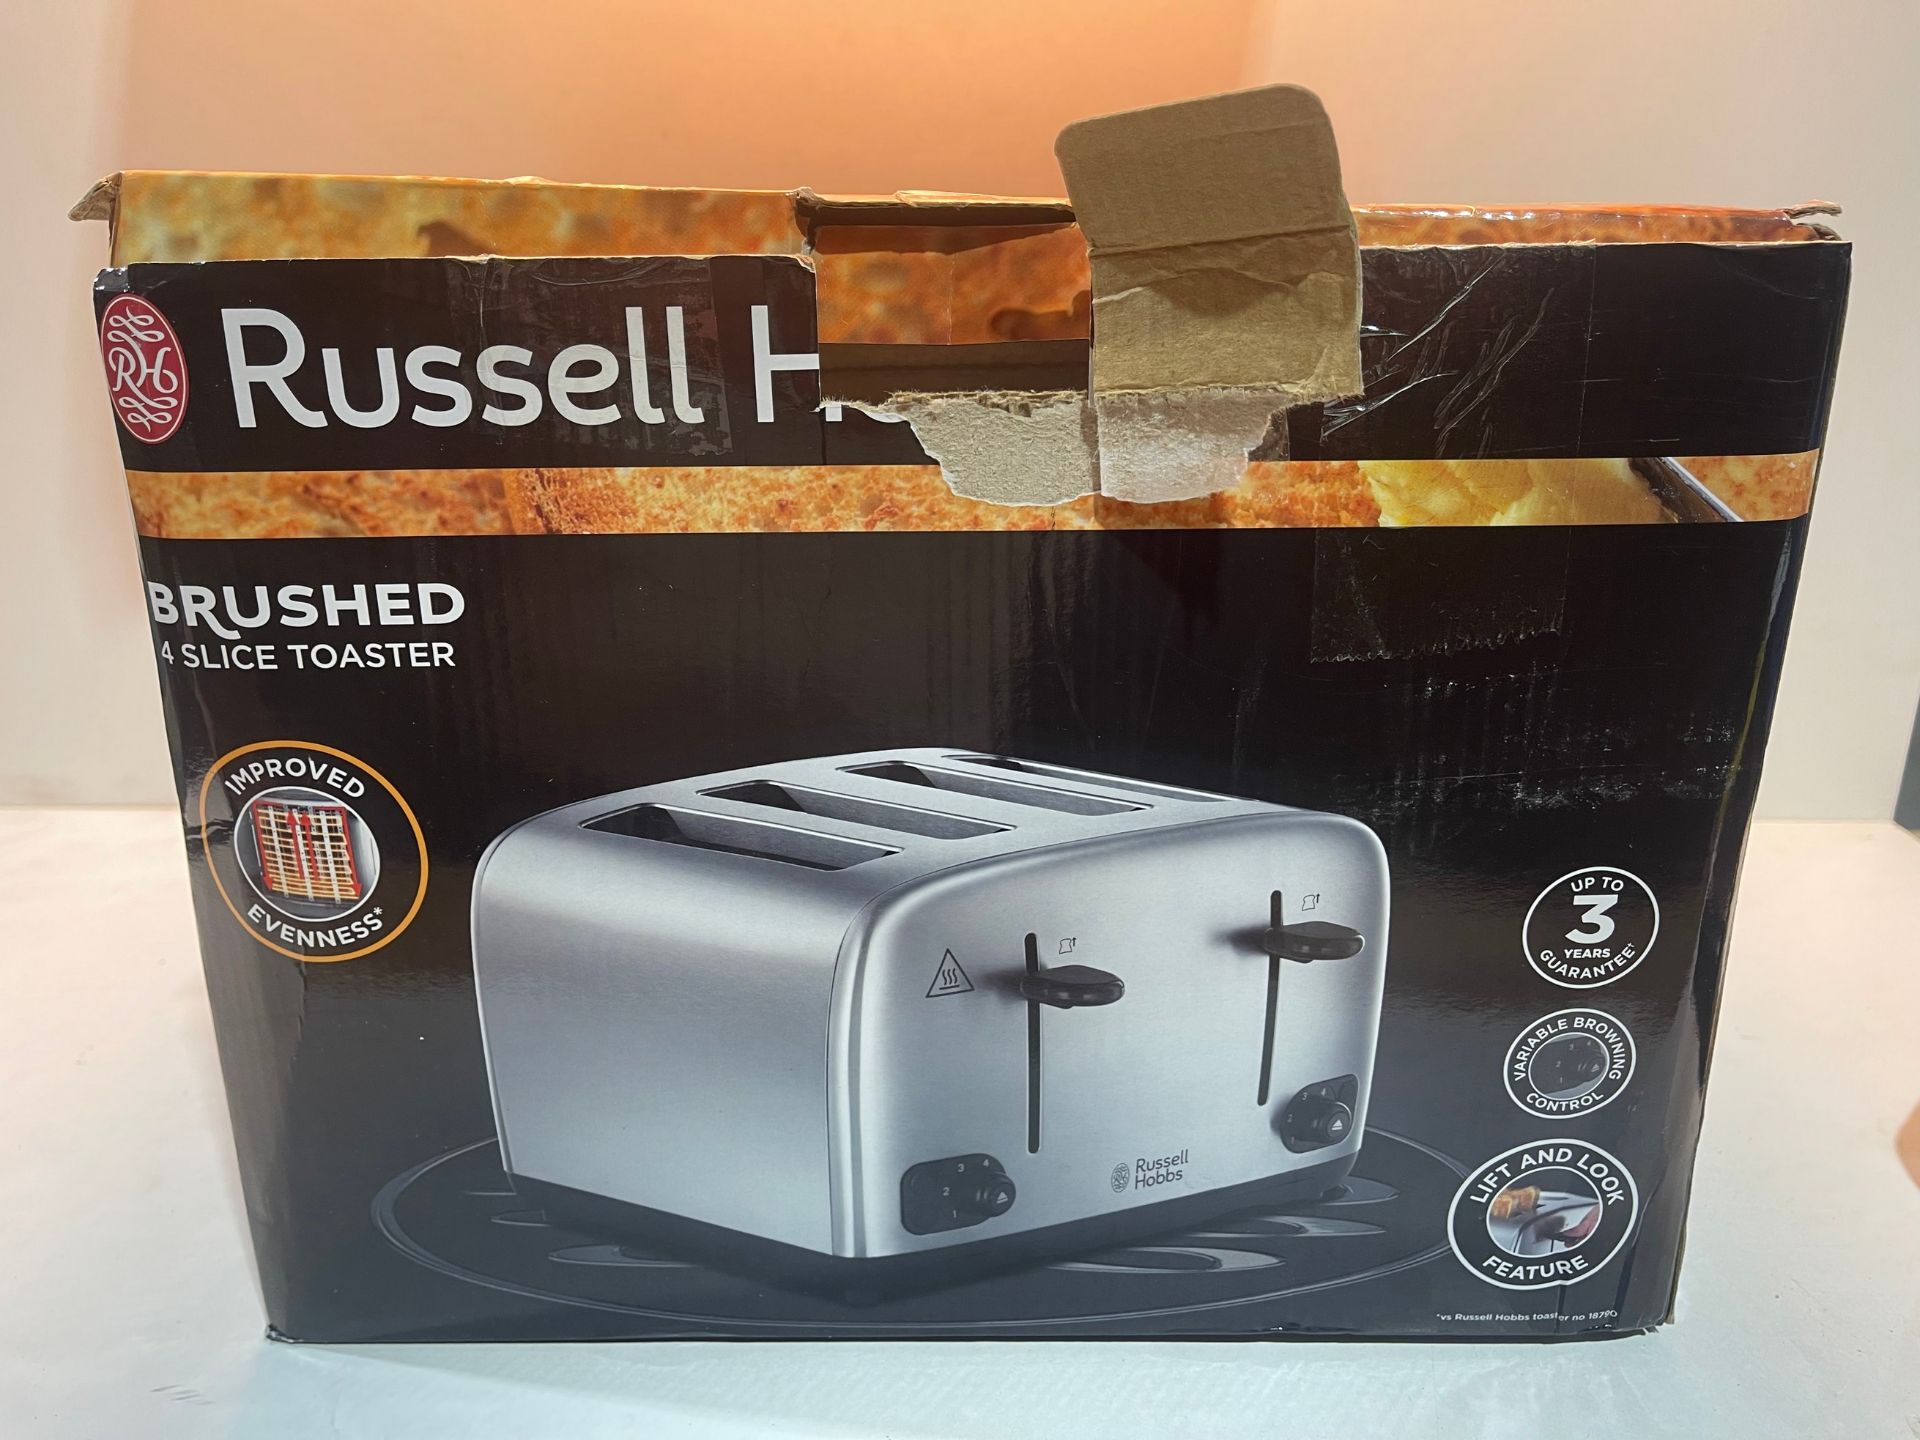 Breville VTT476 Impressions 4-Slice Toaster with High-Lift and Wide Slots, Black Â£34.99Condition - Image 2 of 2